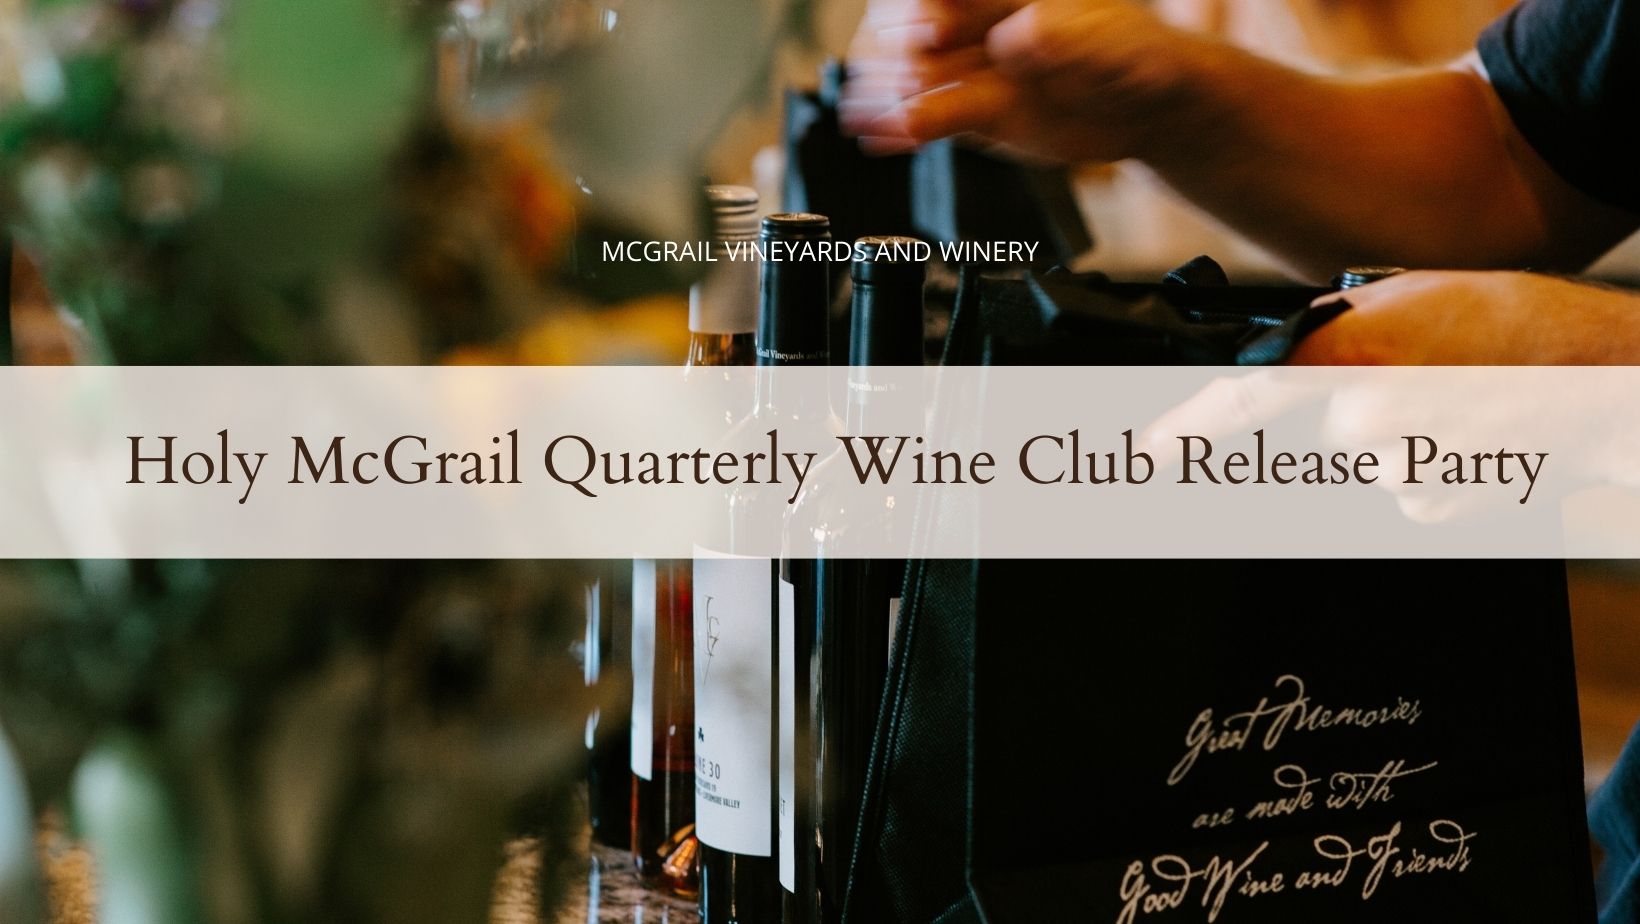 Holy McGrail Quarterly Wine Club Release Party